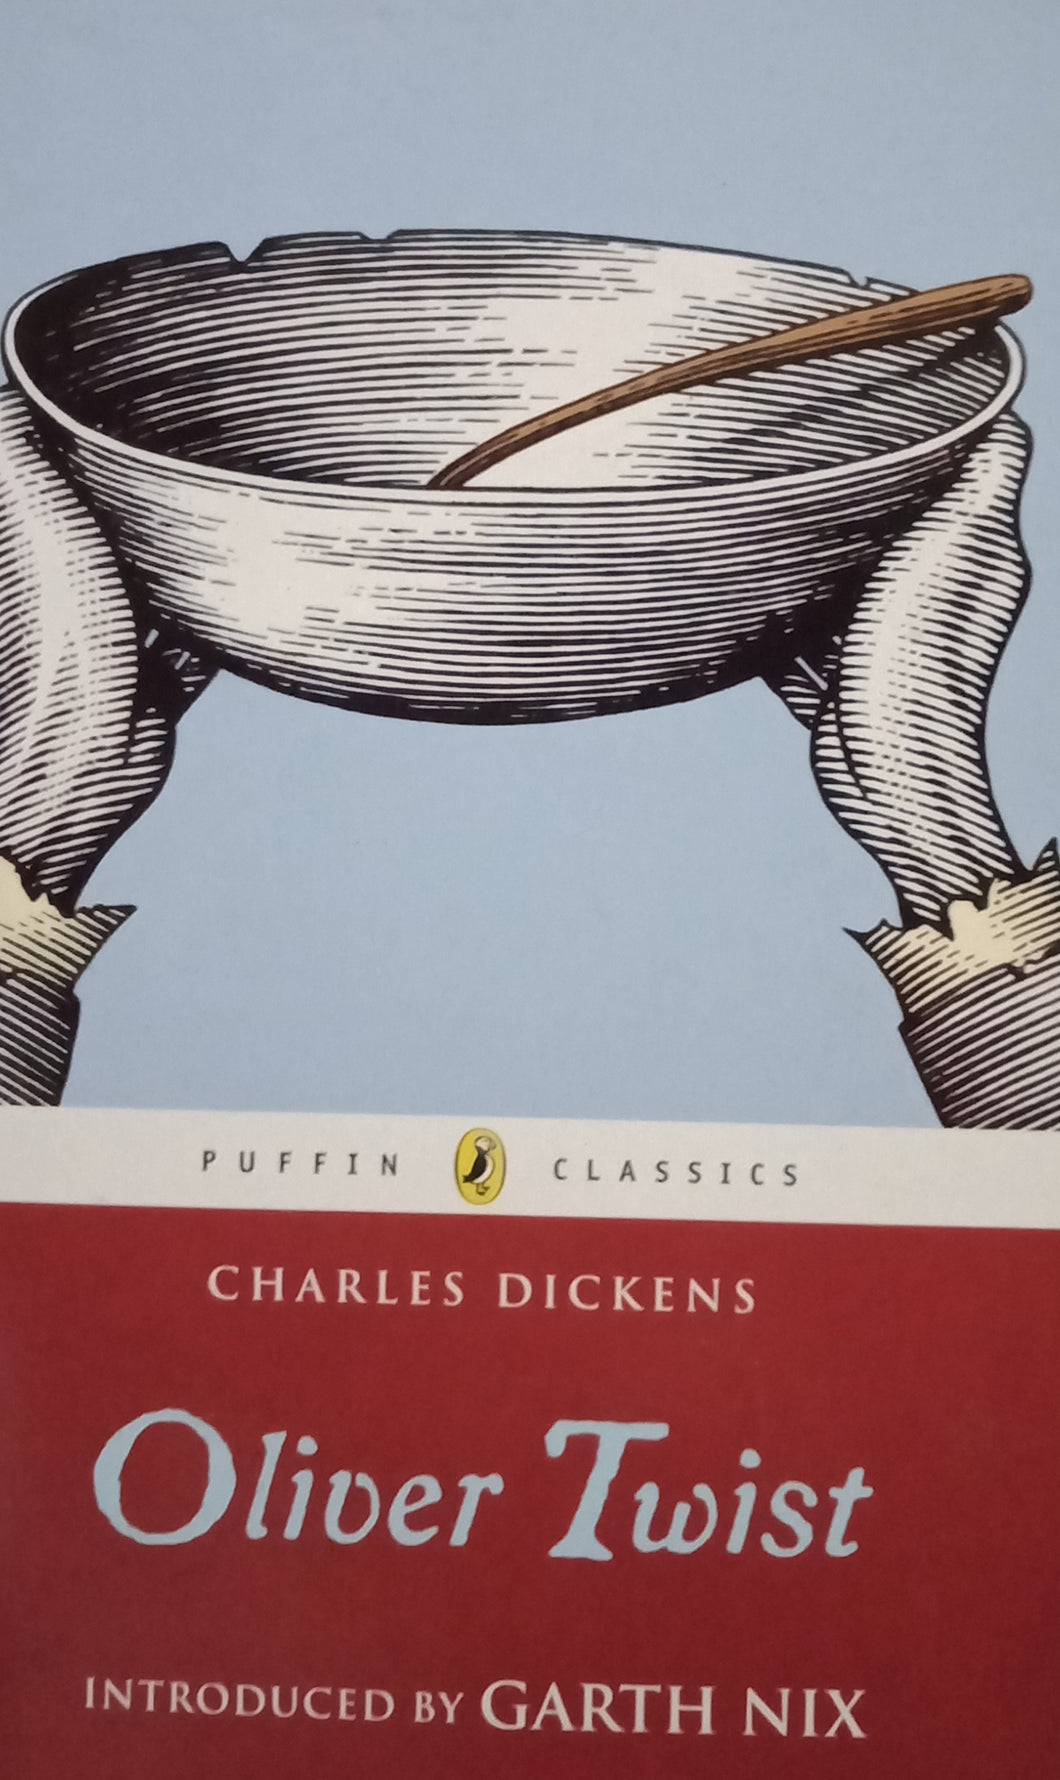 Okiver Twist by Charles Dickens